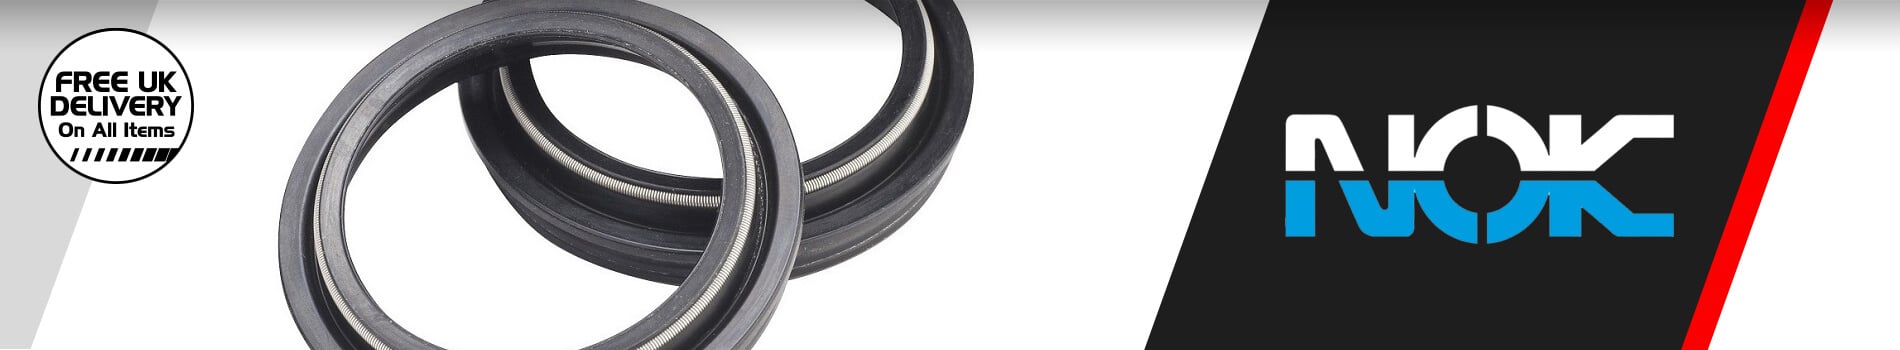 Fork Dust Seals - Free UK Delivery